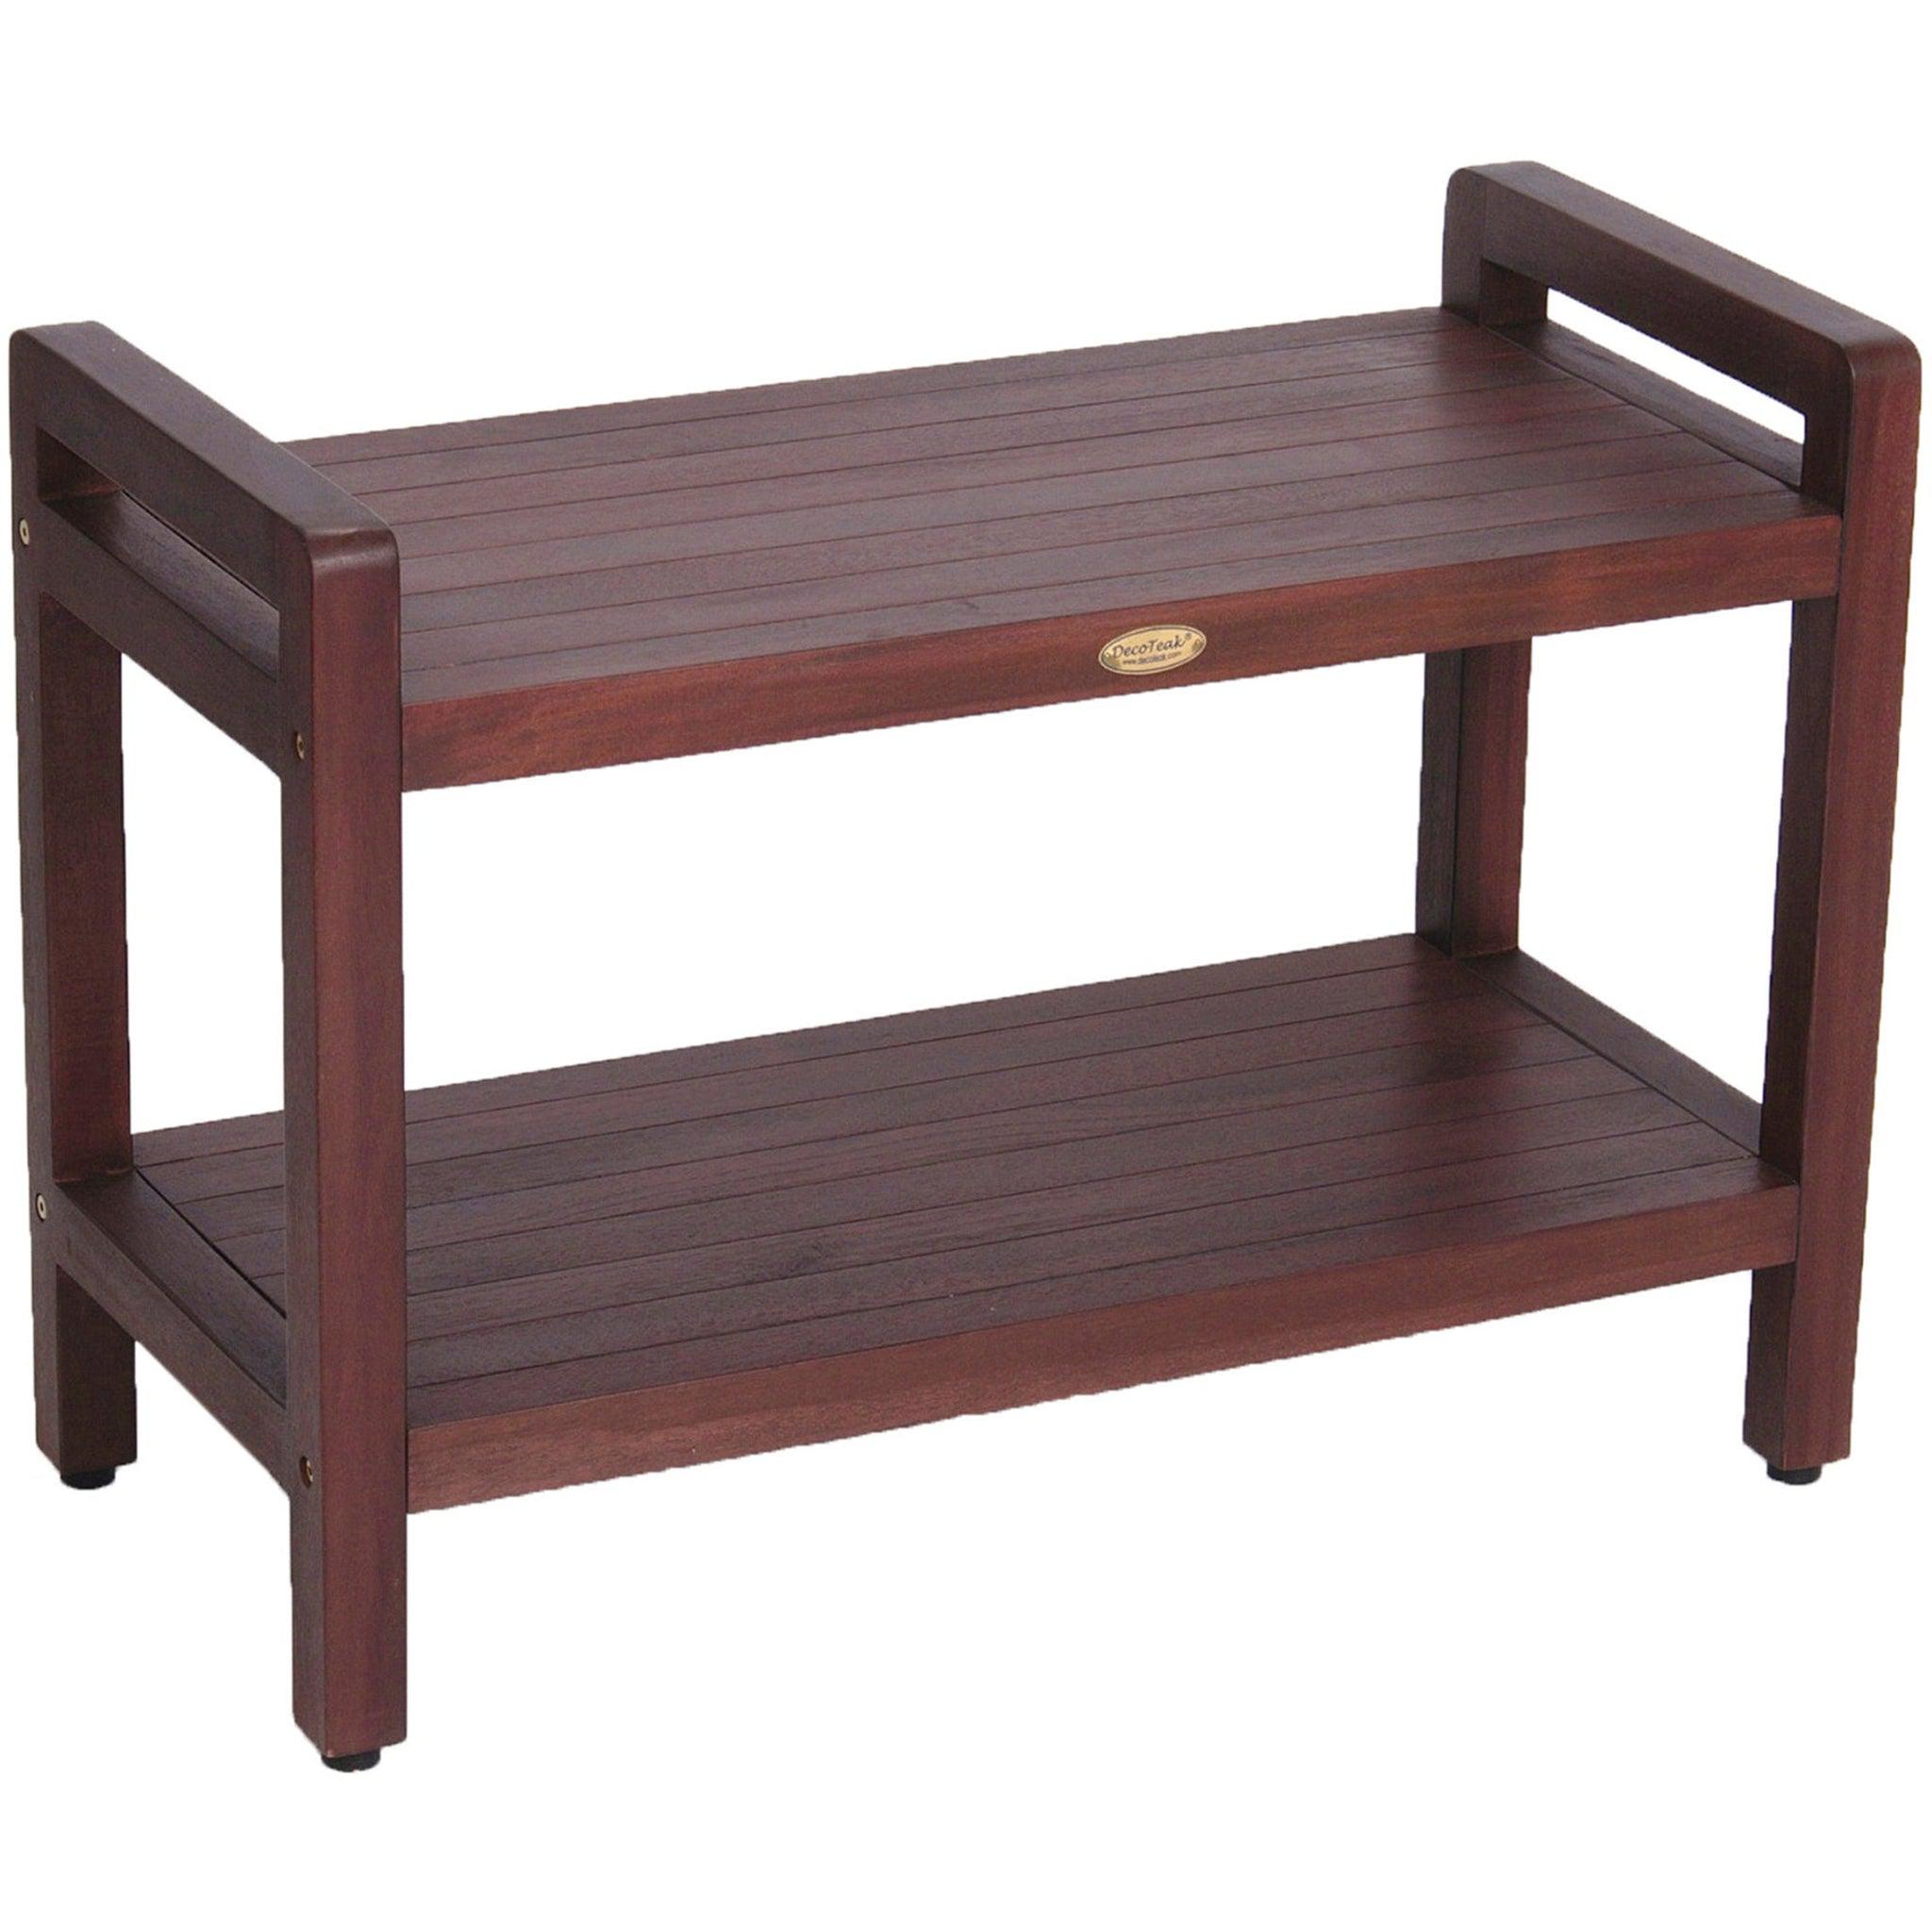 DecoTeak by E&T Horizons, DecoTeak Eleganto 29" Woodland Brown Solid Teak Wood Shower Bench With LiftAide Arms and Shelf